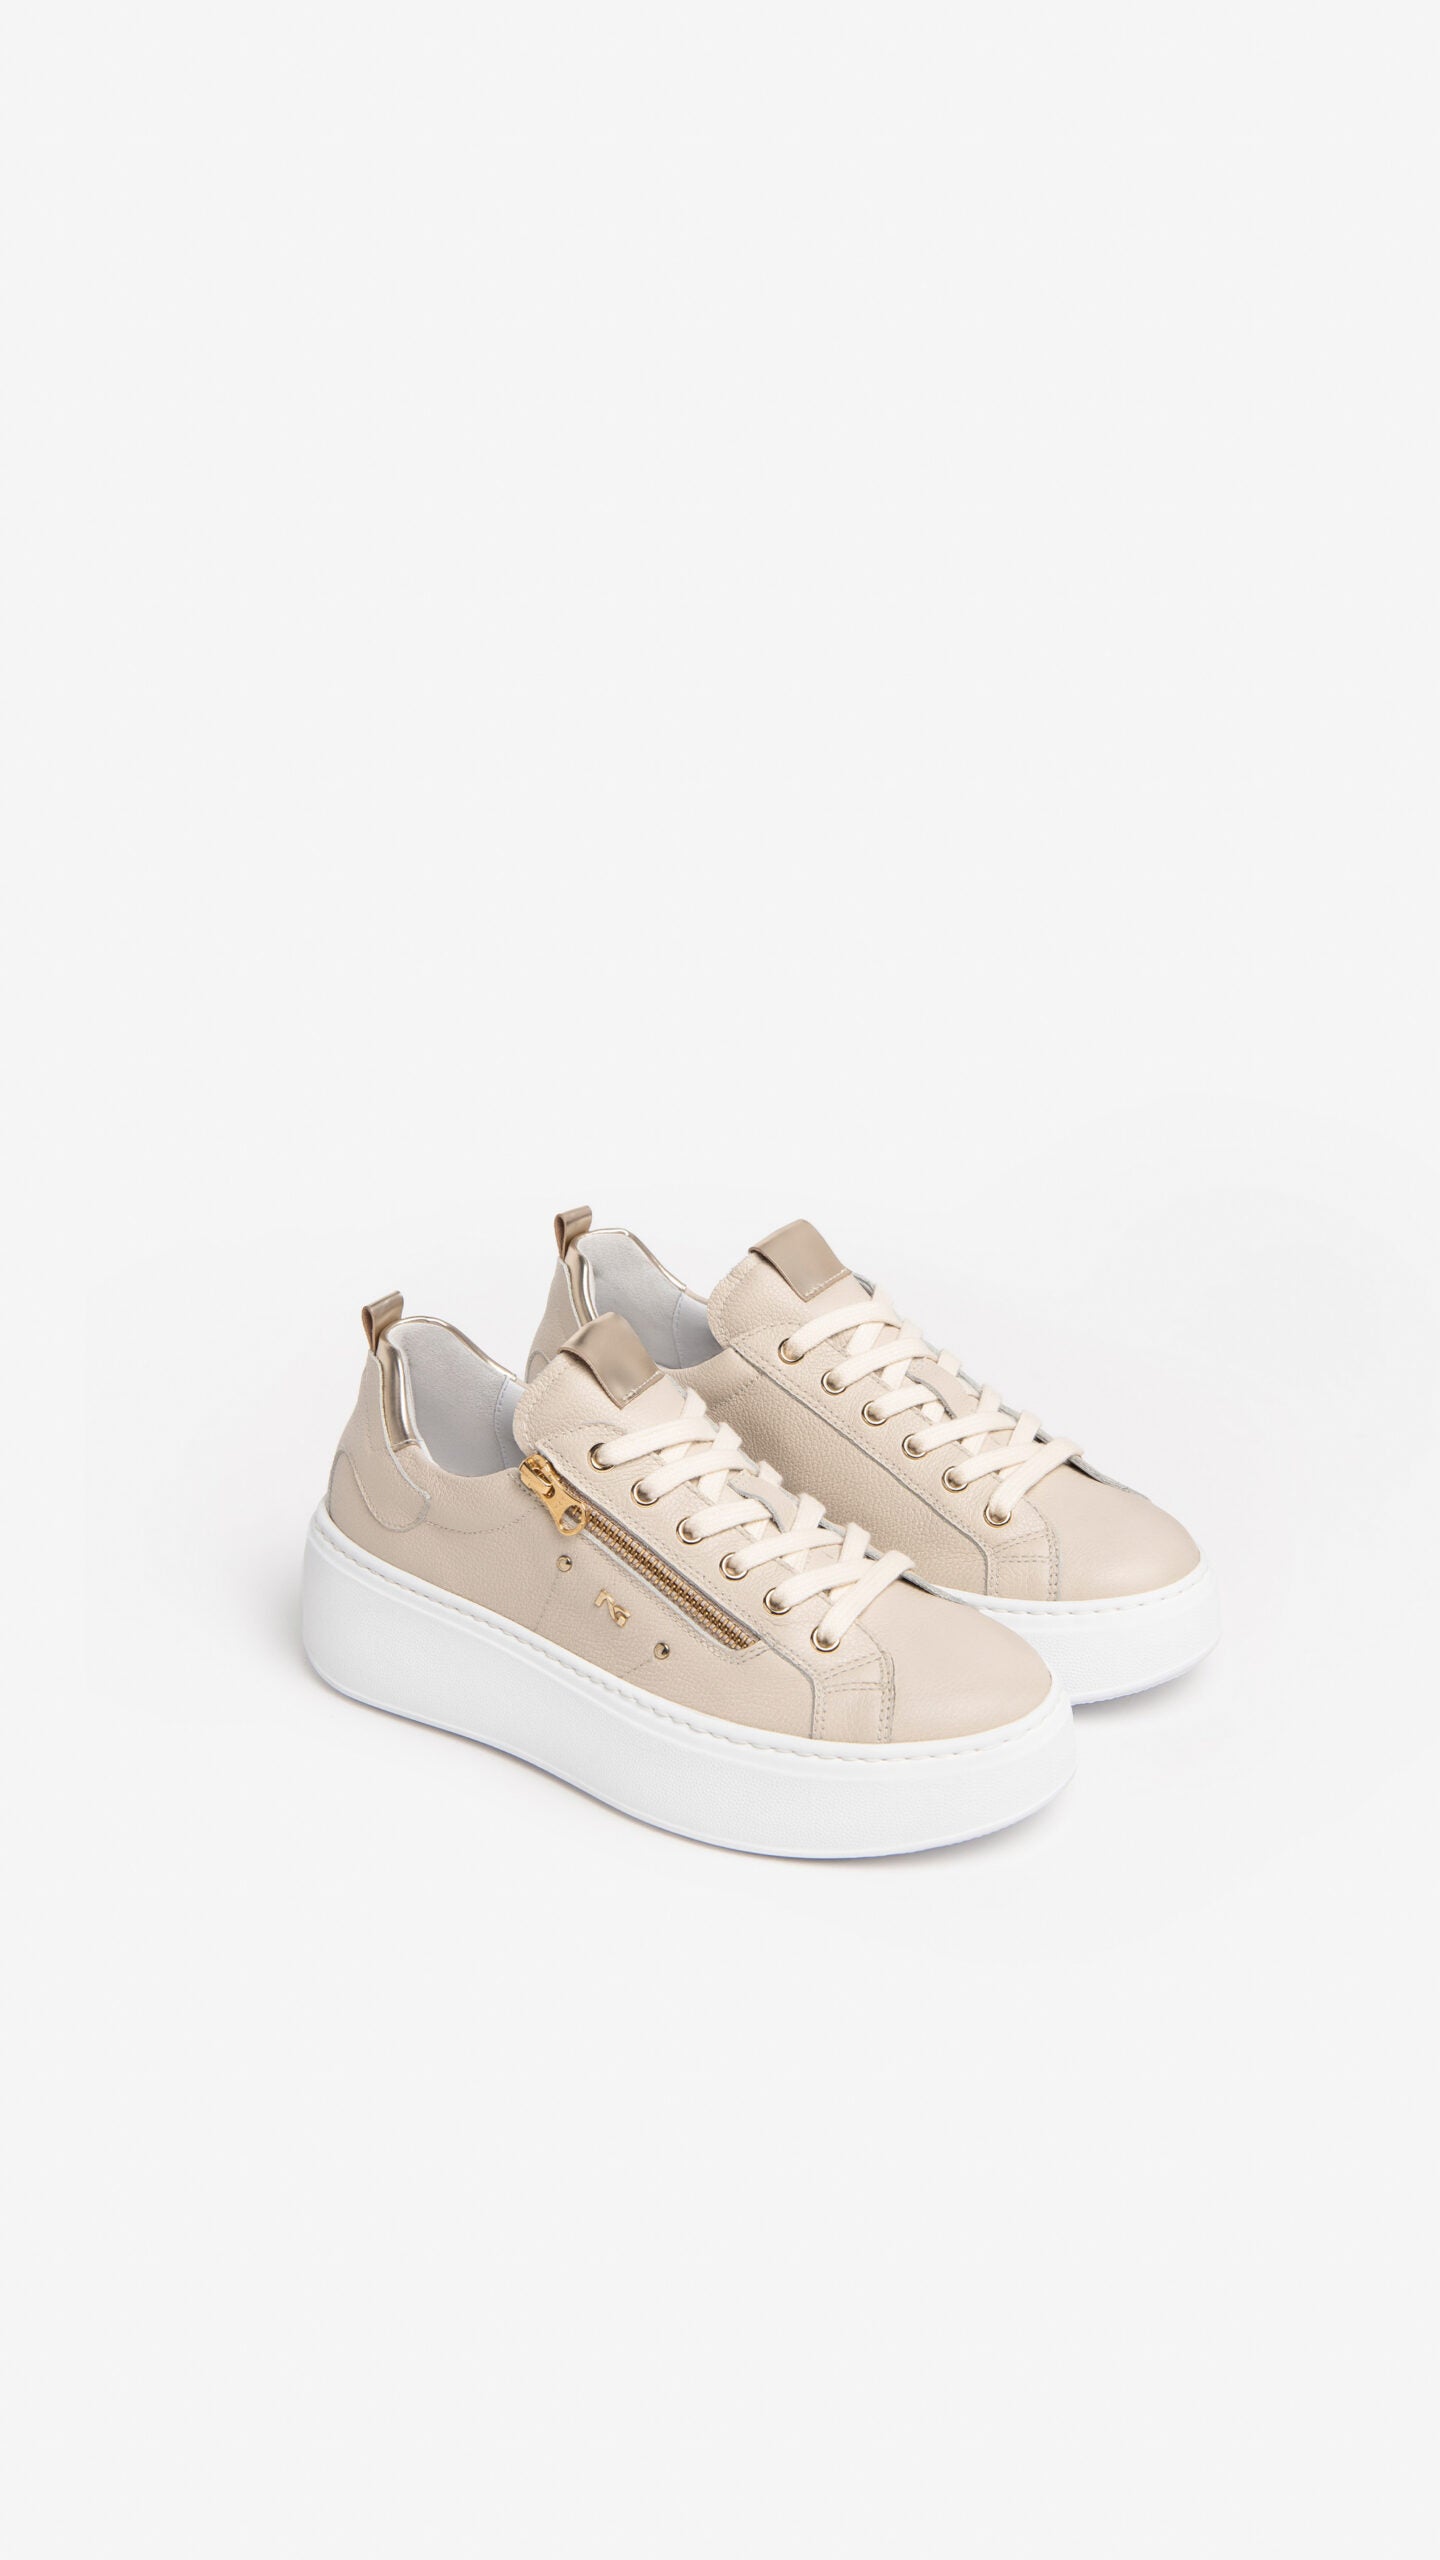 NeroGiardini Dollarino Beige and Gold Leather Wedge Trainer with side zip.